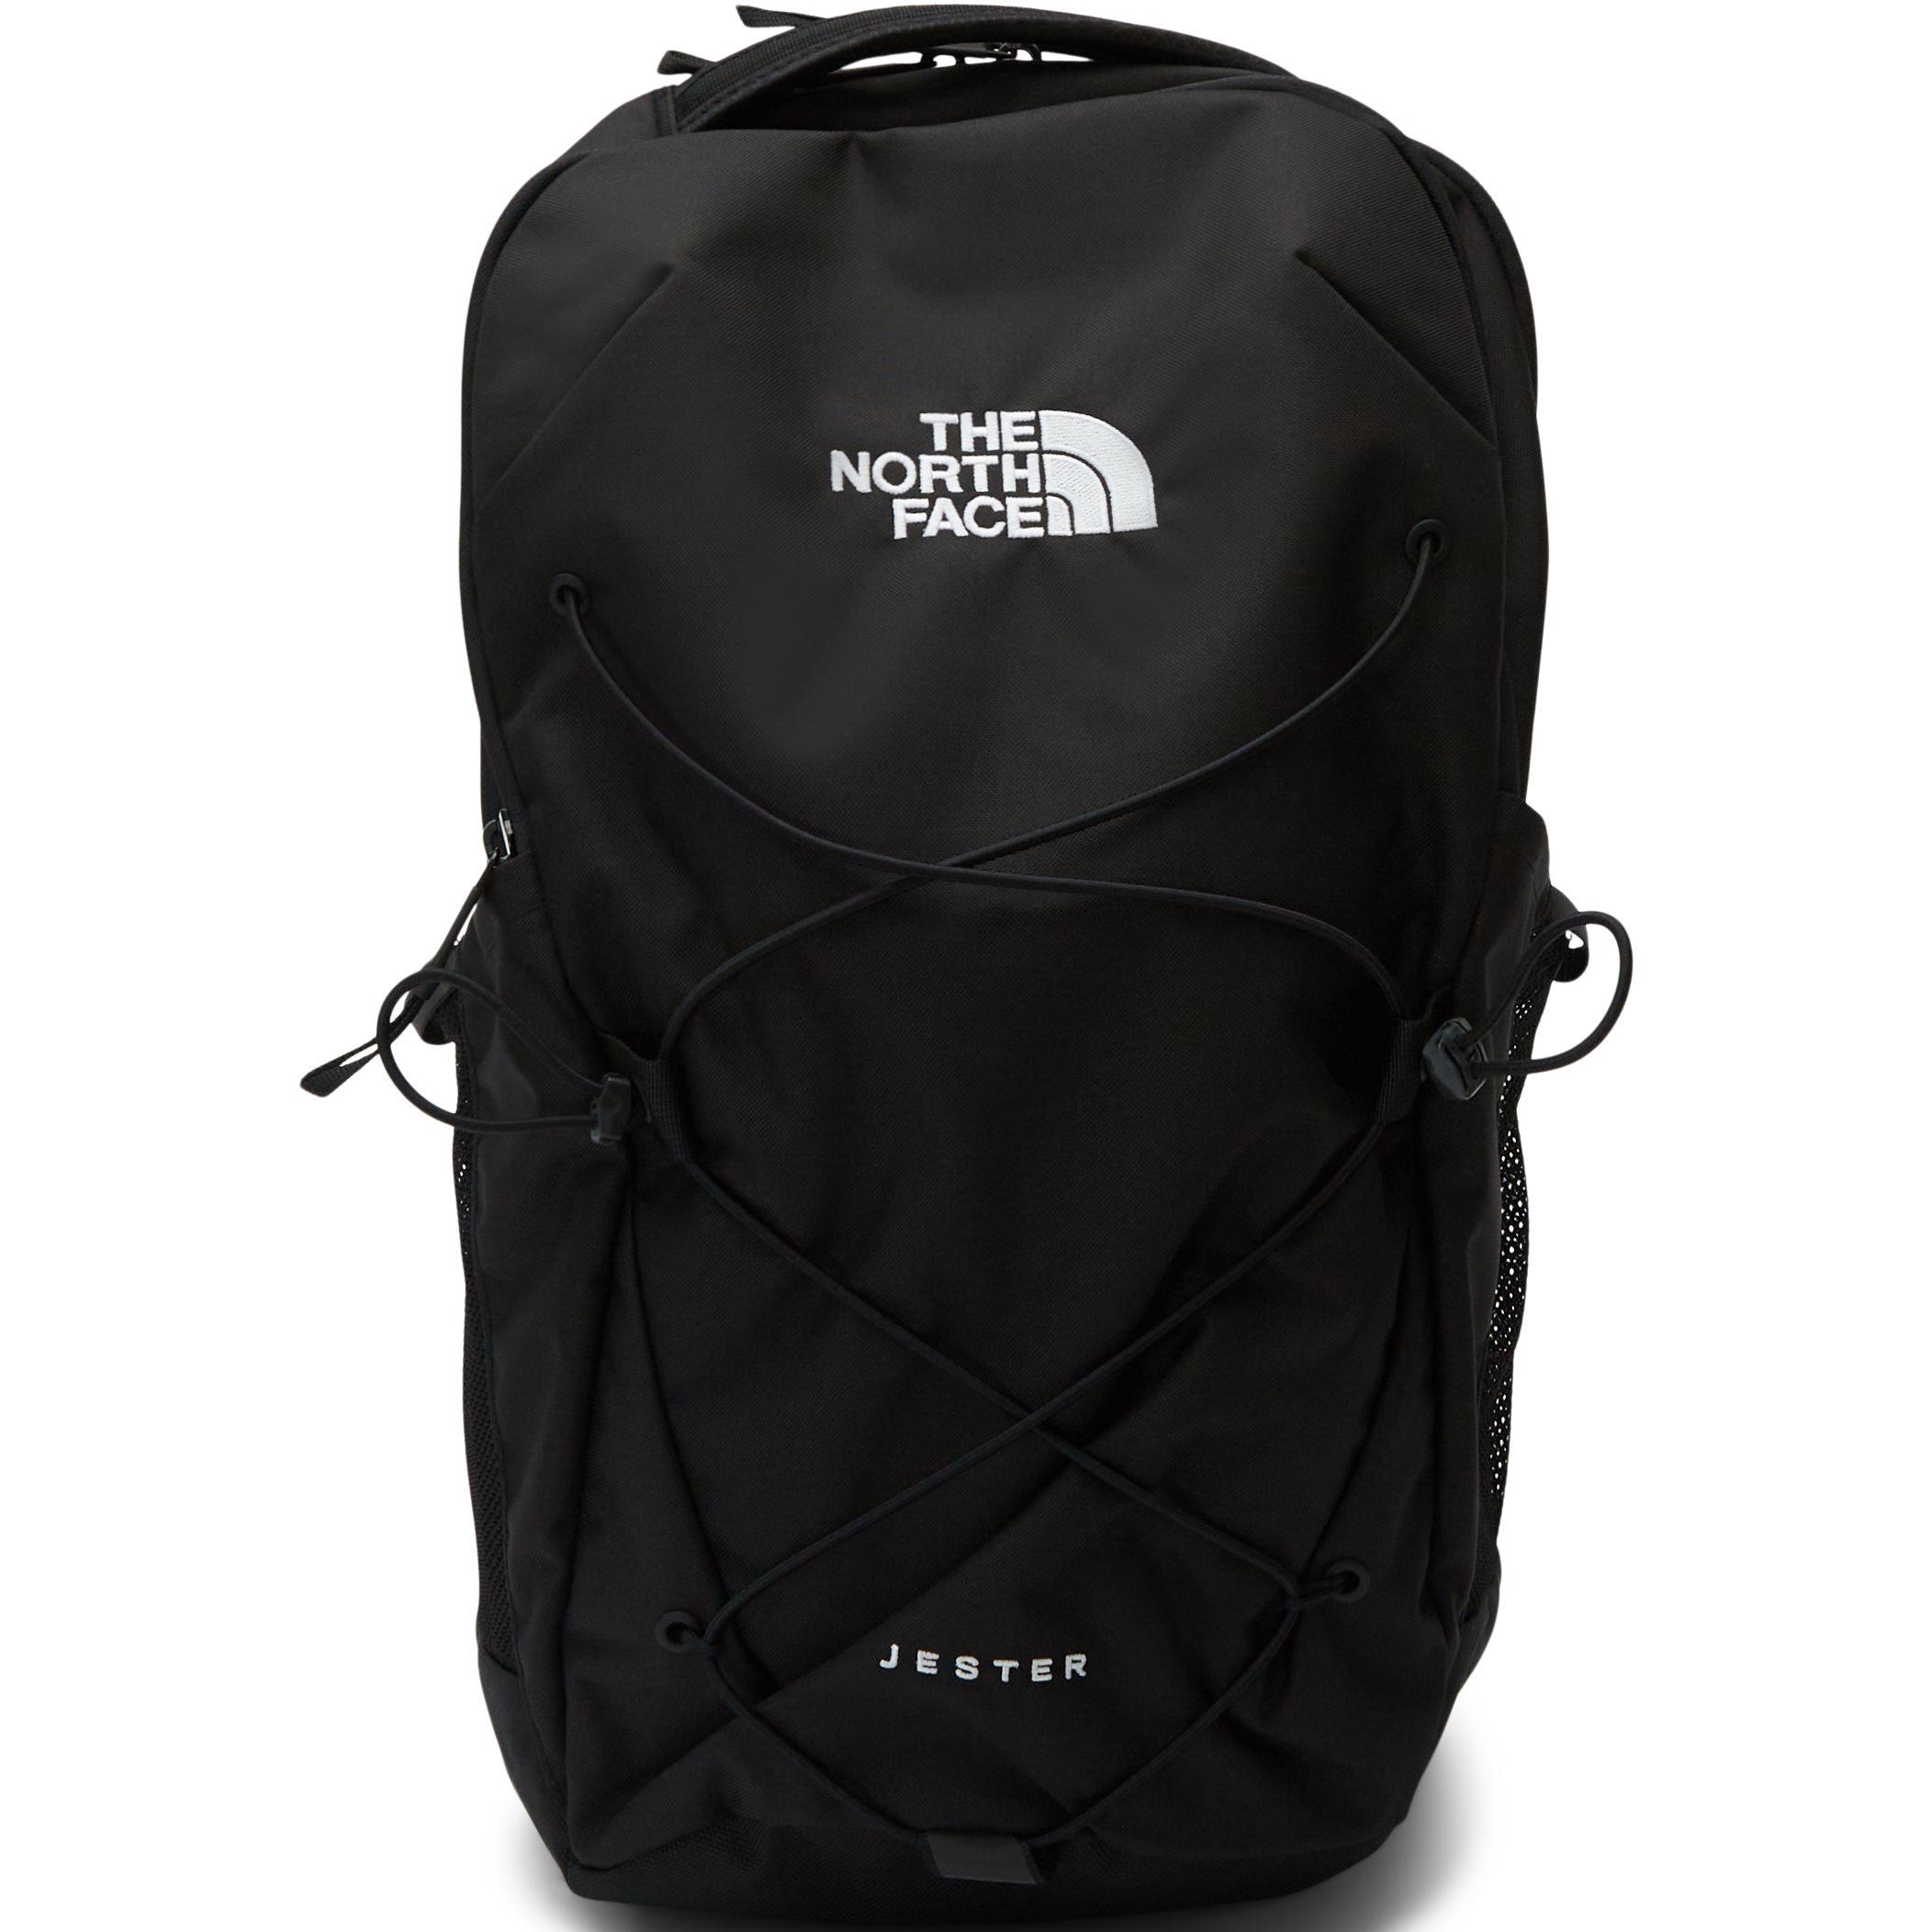 The North Face Bags JESTER NF0A3VXFJK31 2303 Black